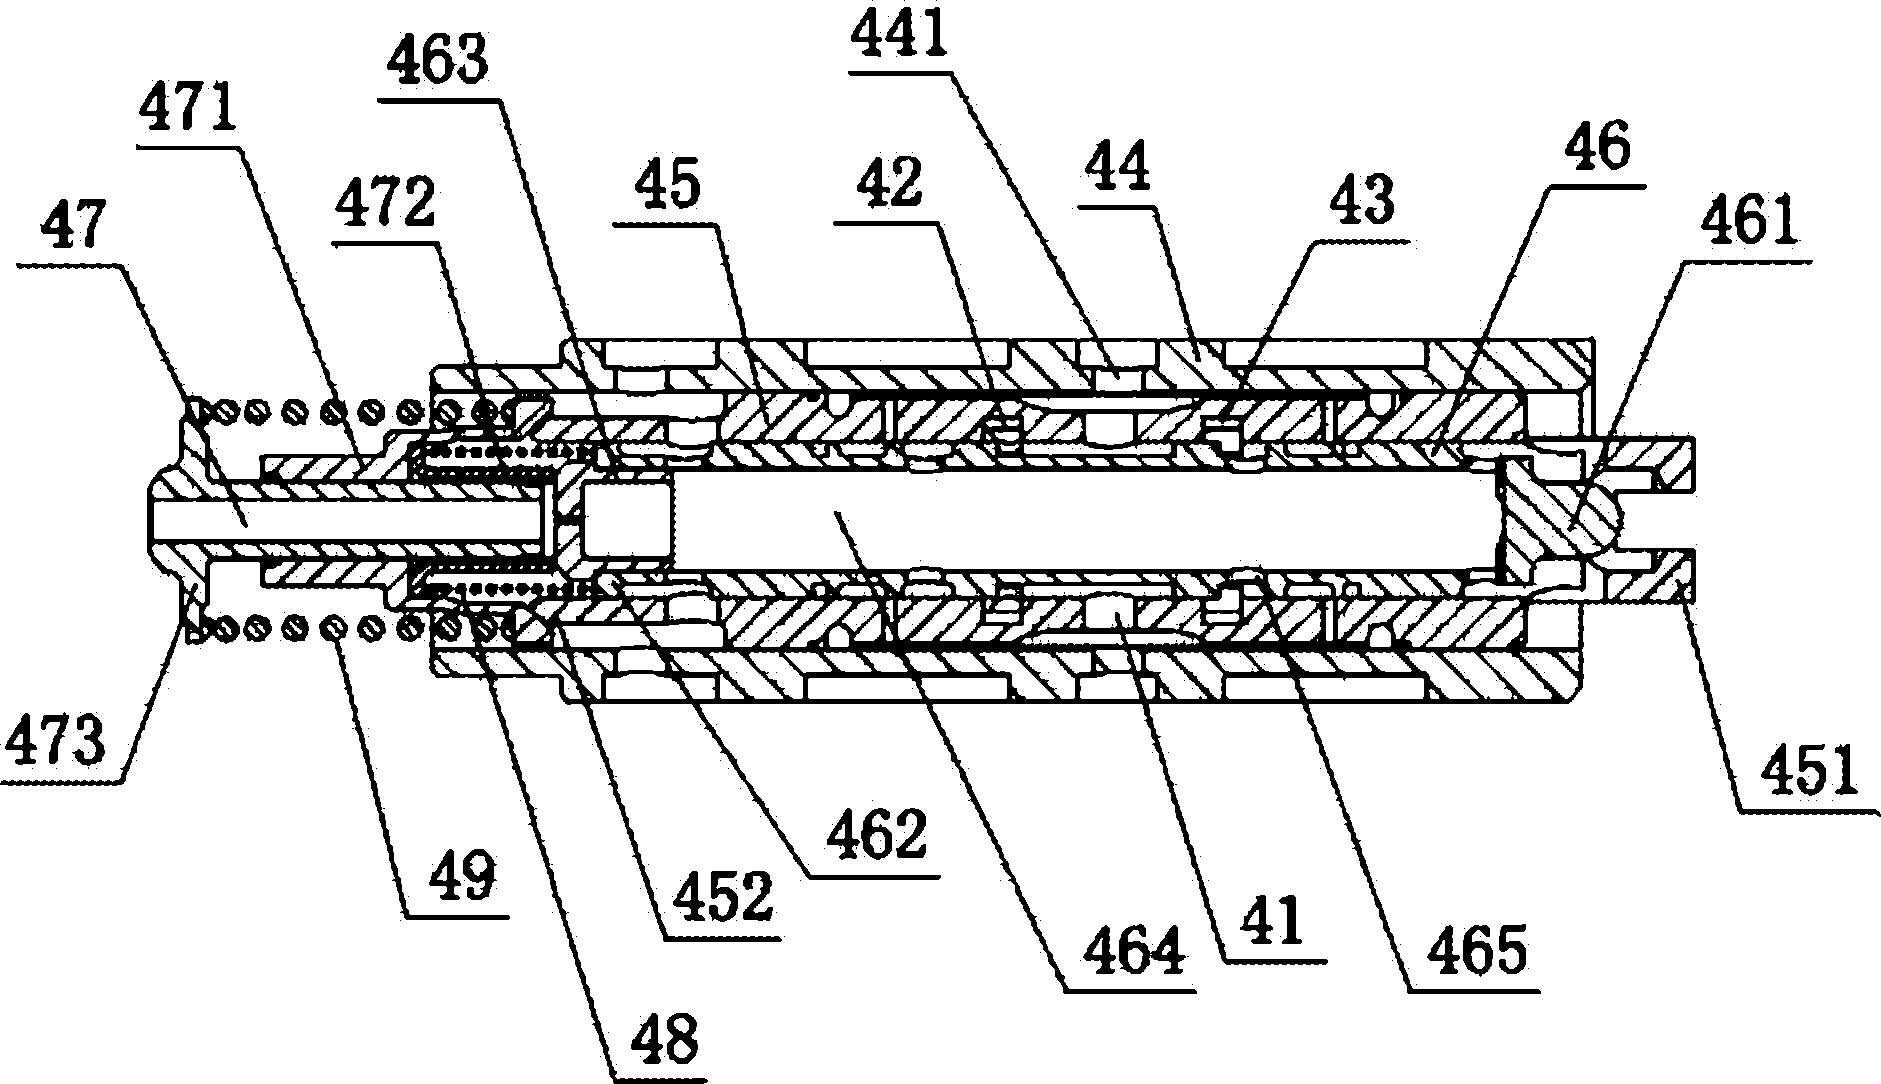 Device for regulating guide blade of turbine